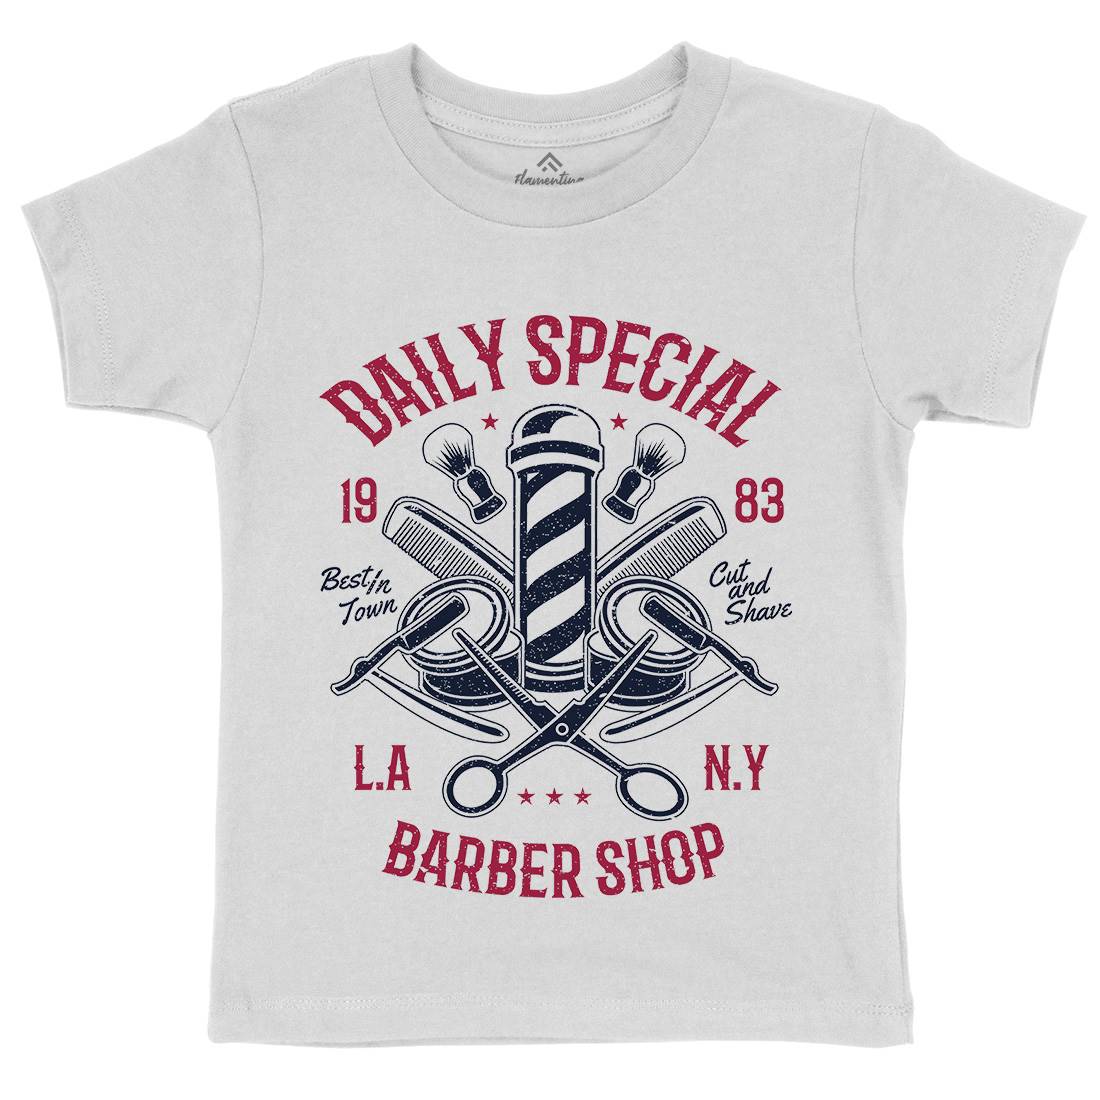 Daily Special Shop Kids Organic Crew Neck T-Shirt Barber A041